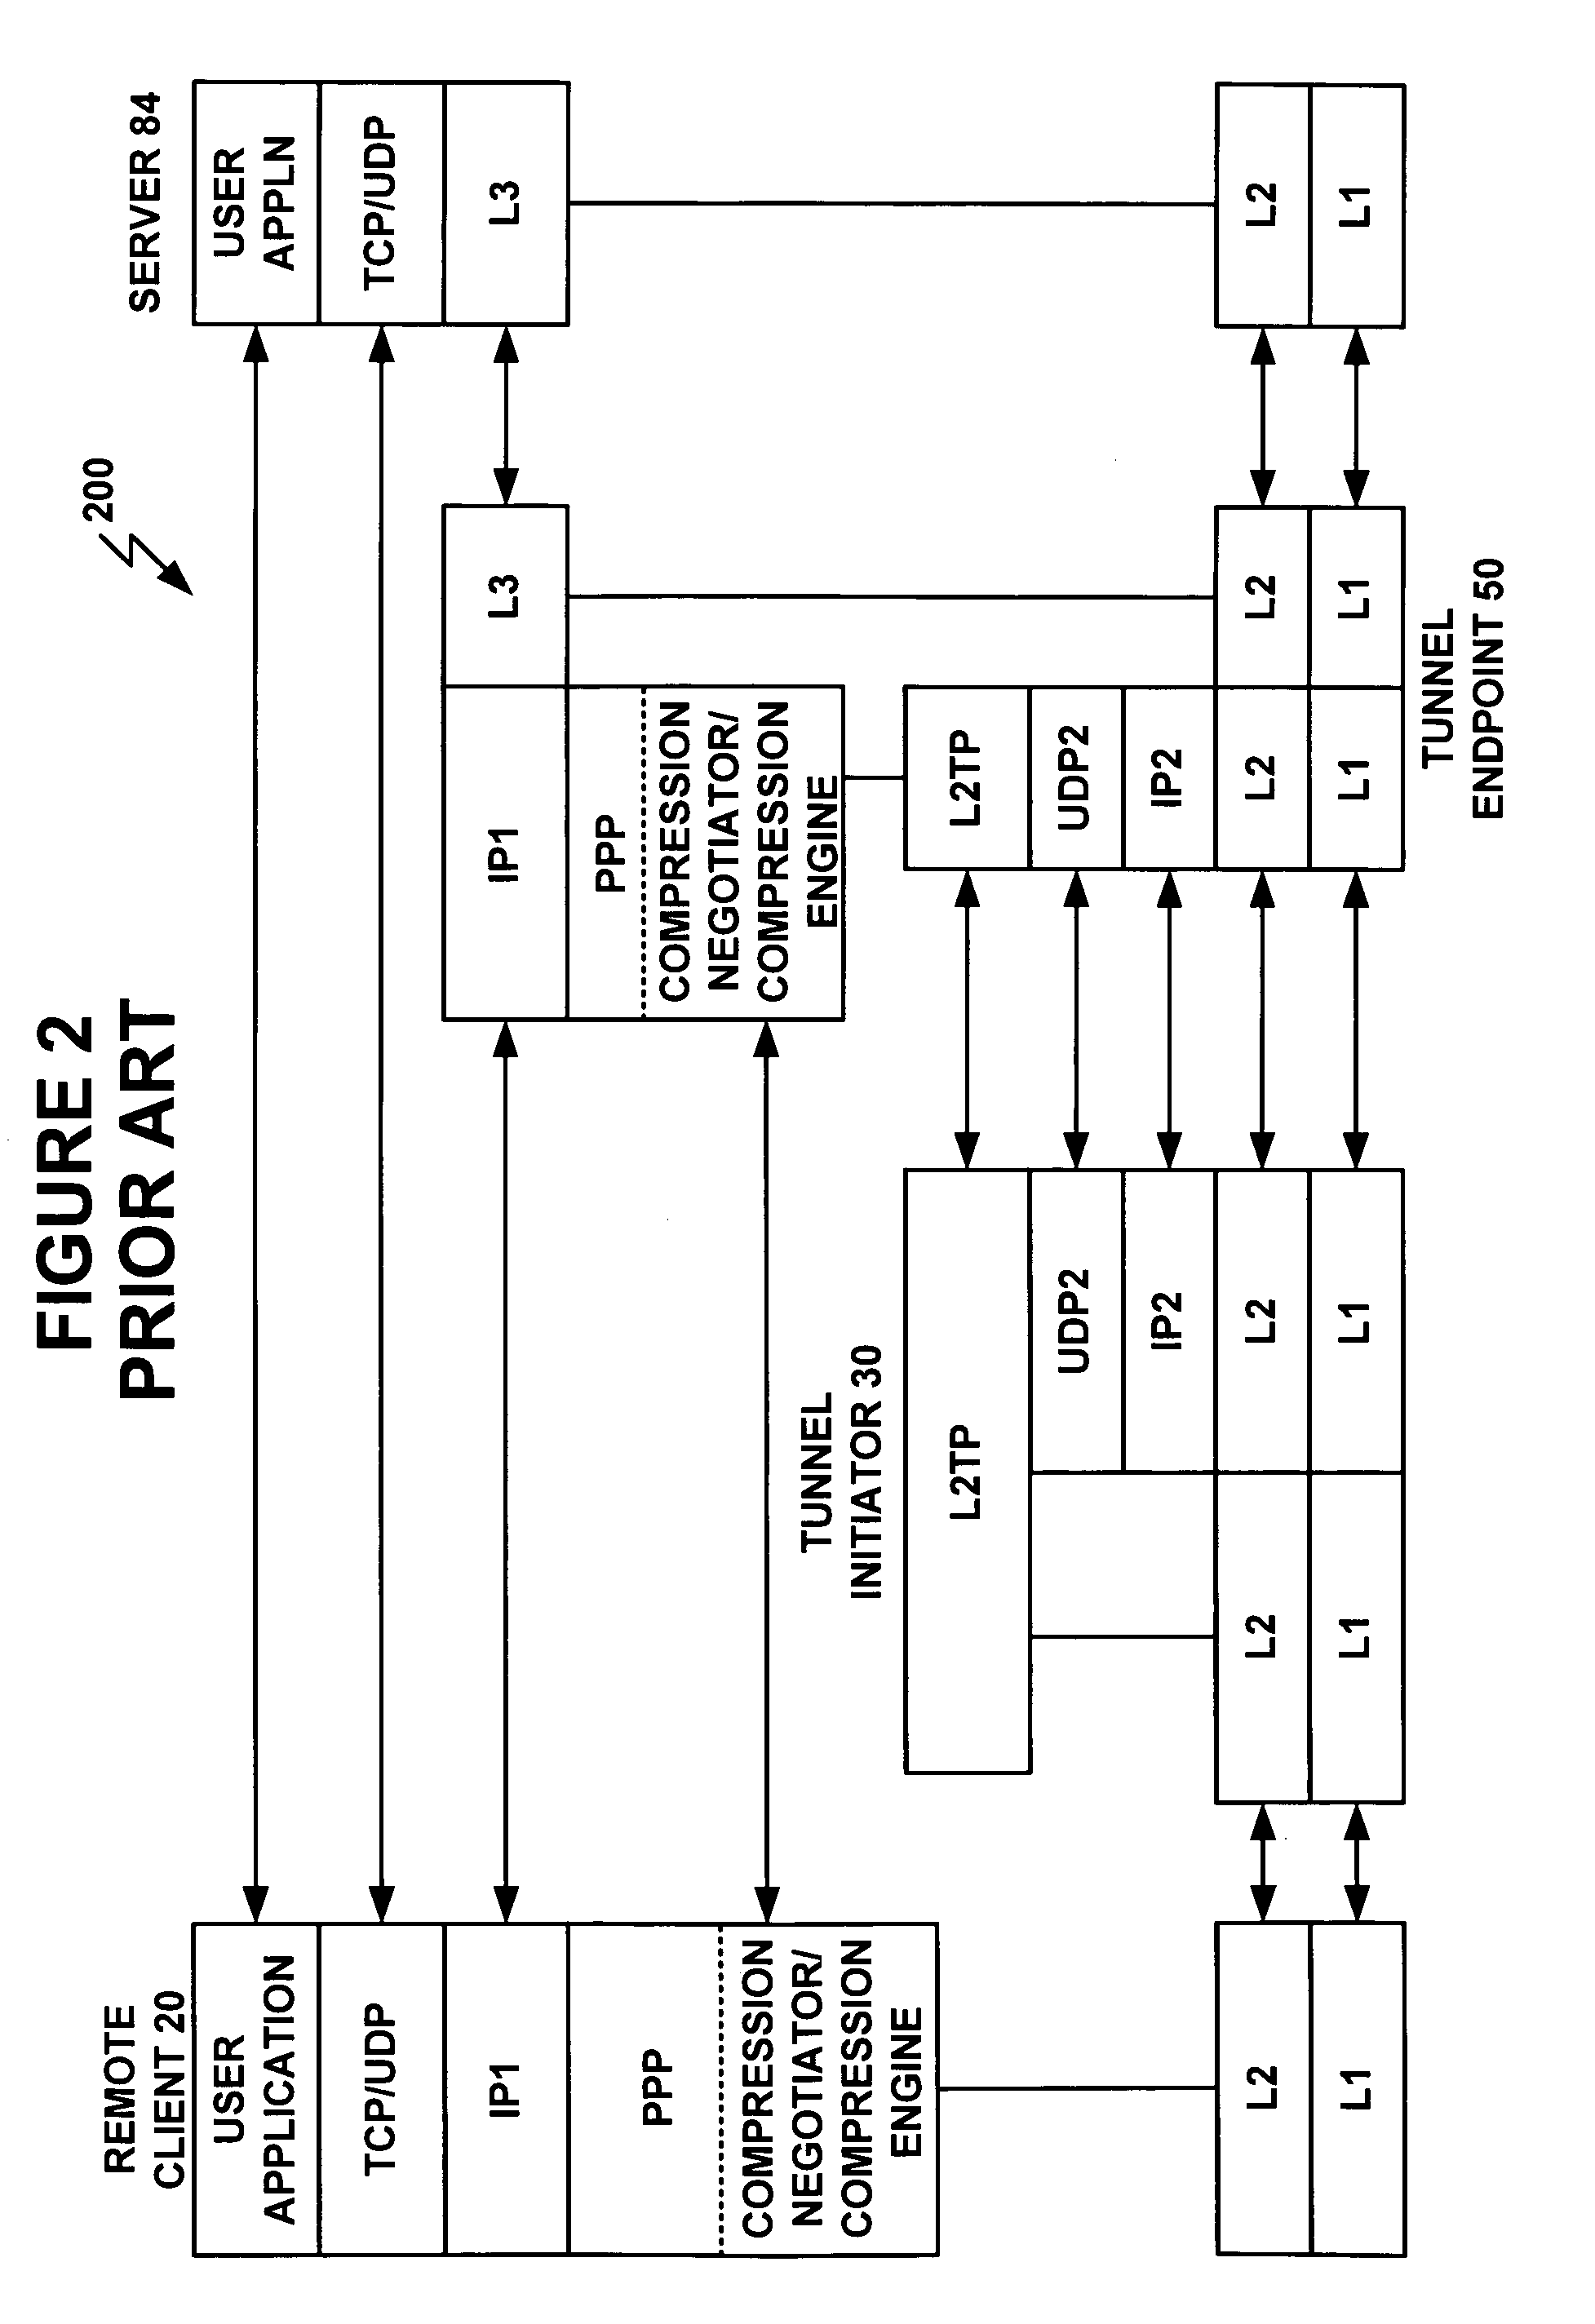 System and method for offloading a computational service on a point-to-point communication link